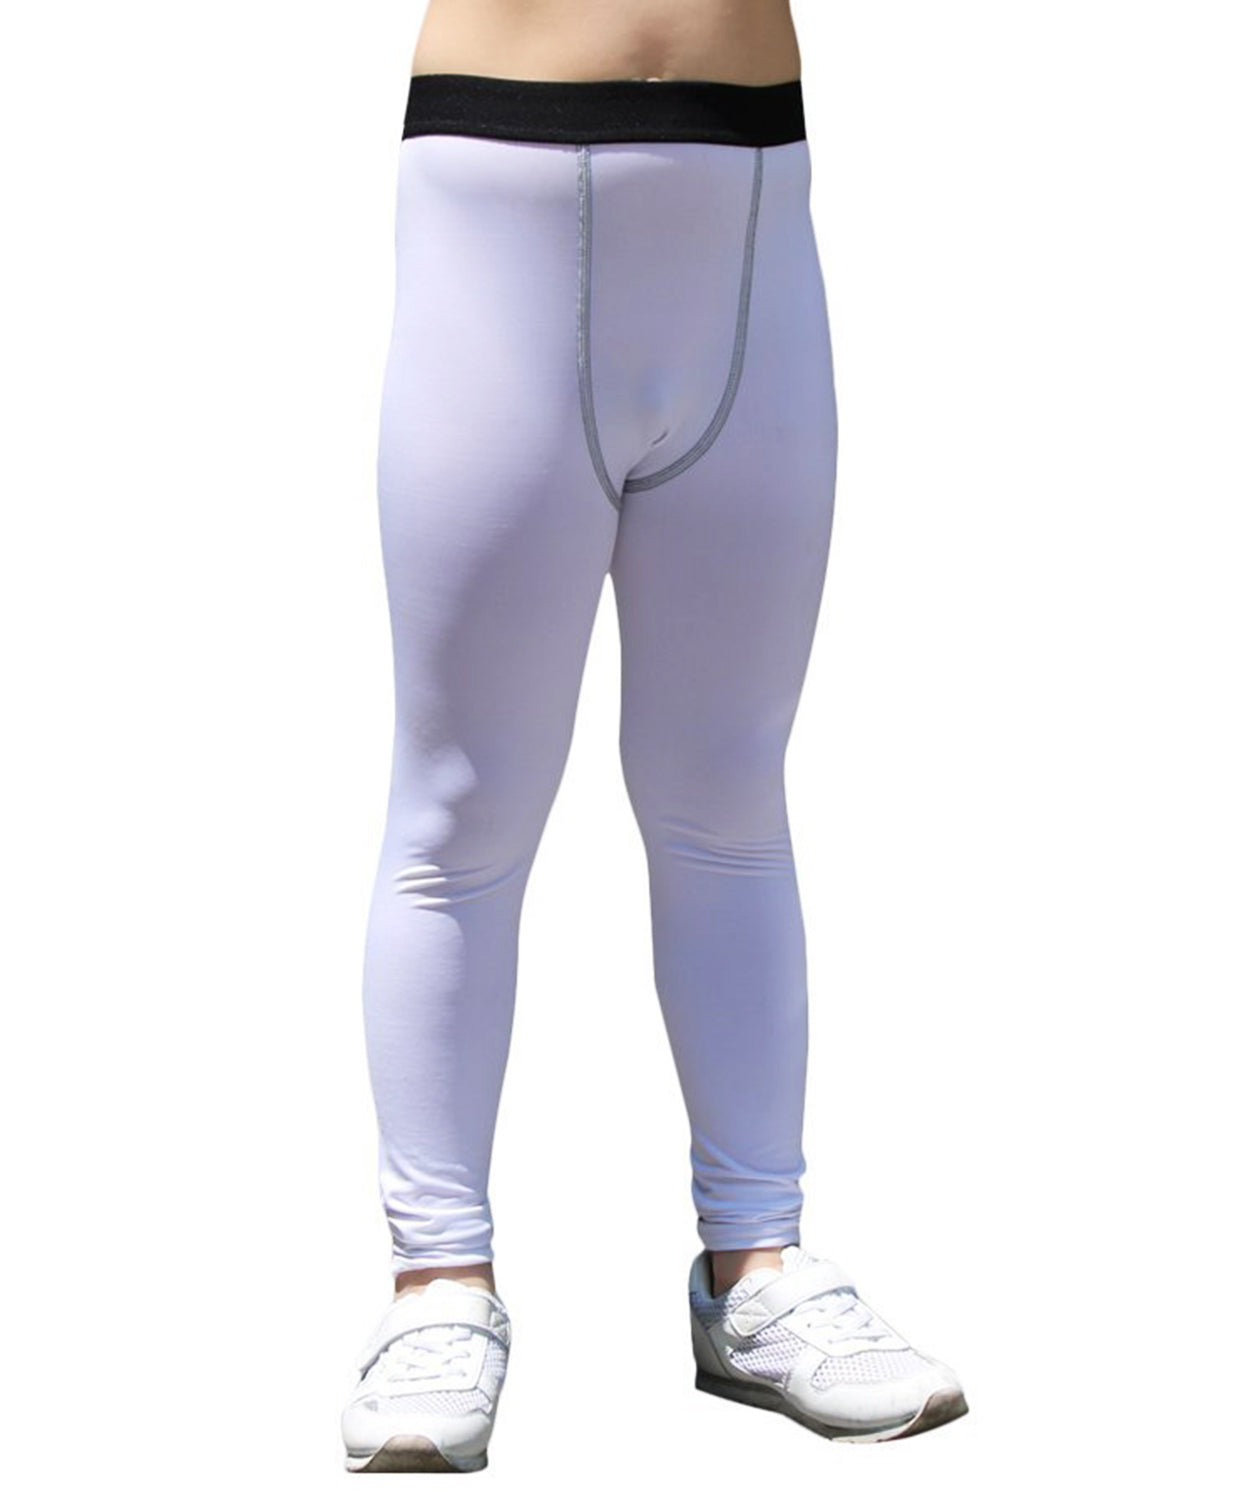  Boys Thermal Compression Leggings Pants Youth Fleece